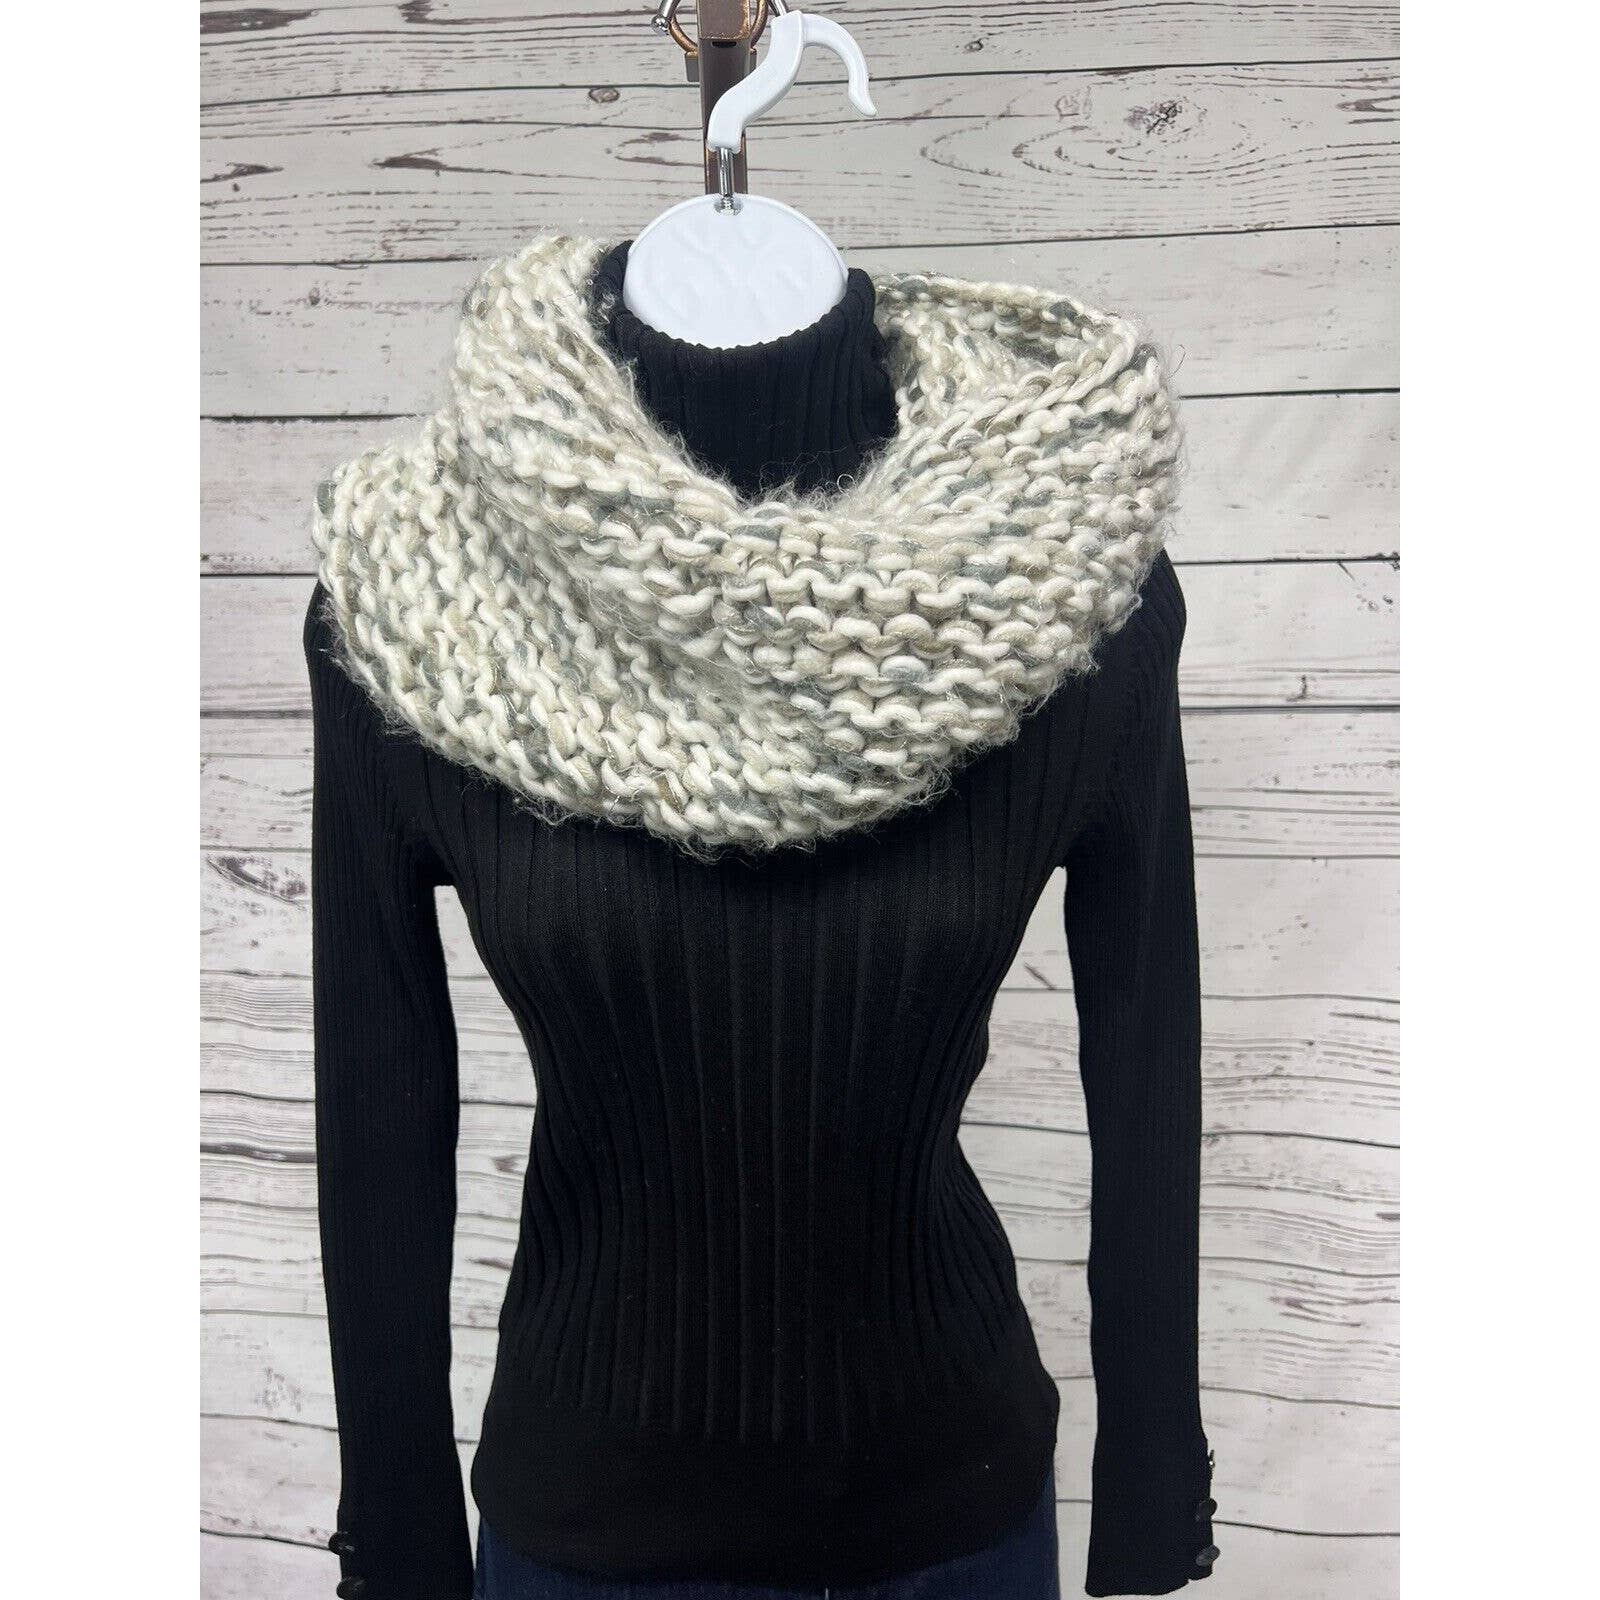 Fossil Infinity Scarf Off White Gray Taupe with Silver Accent Thread Acrylic